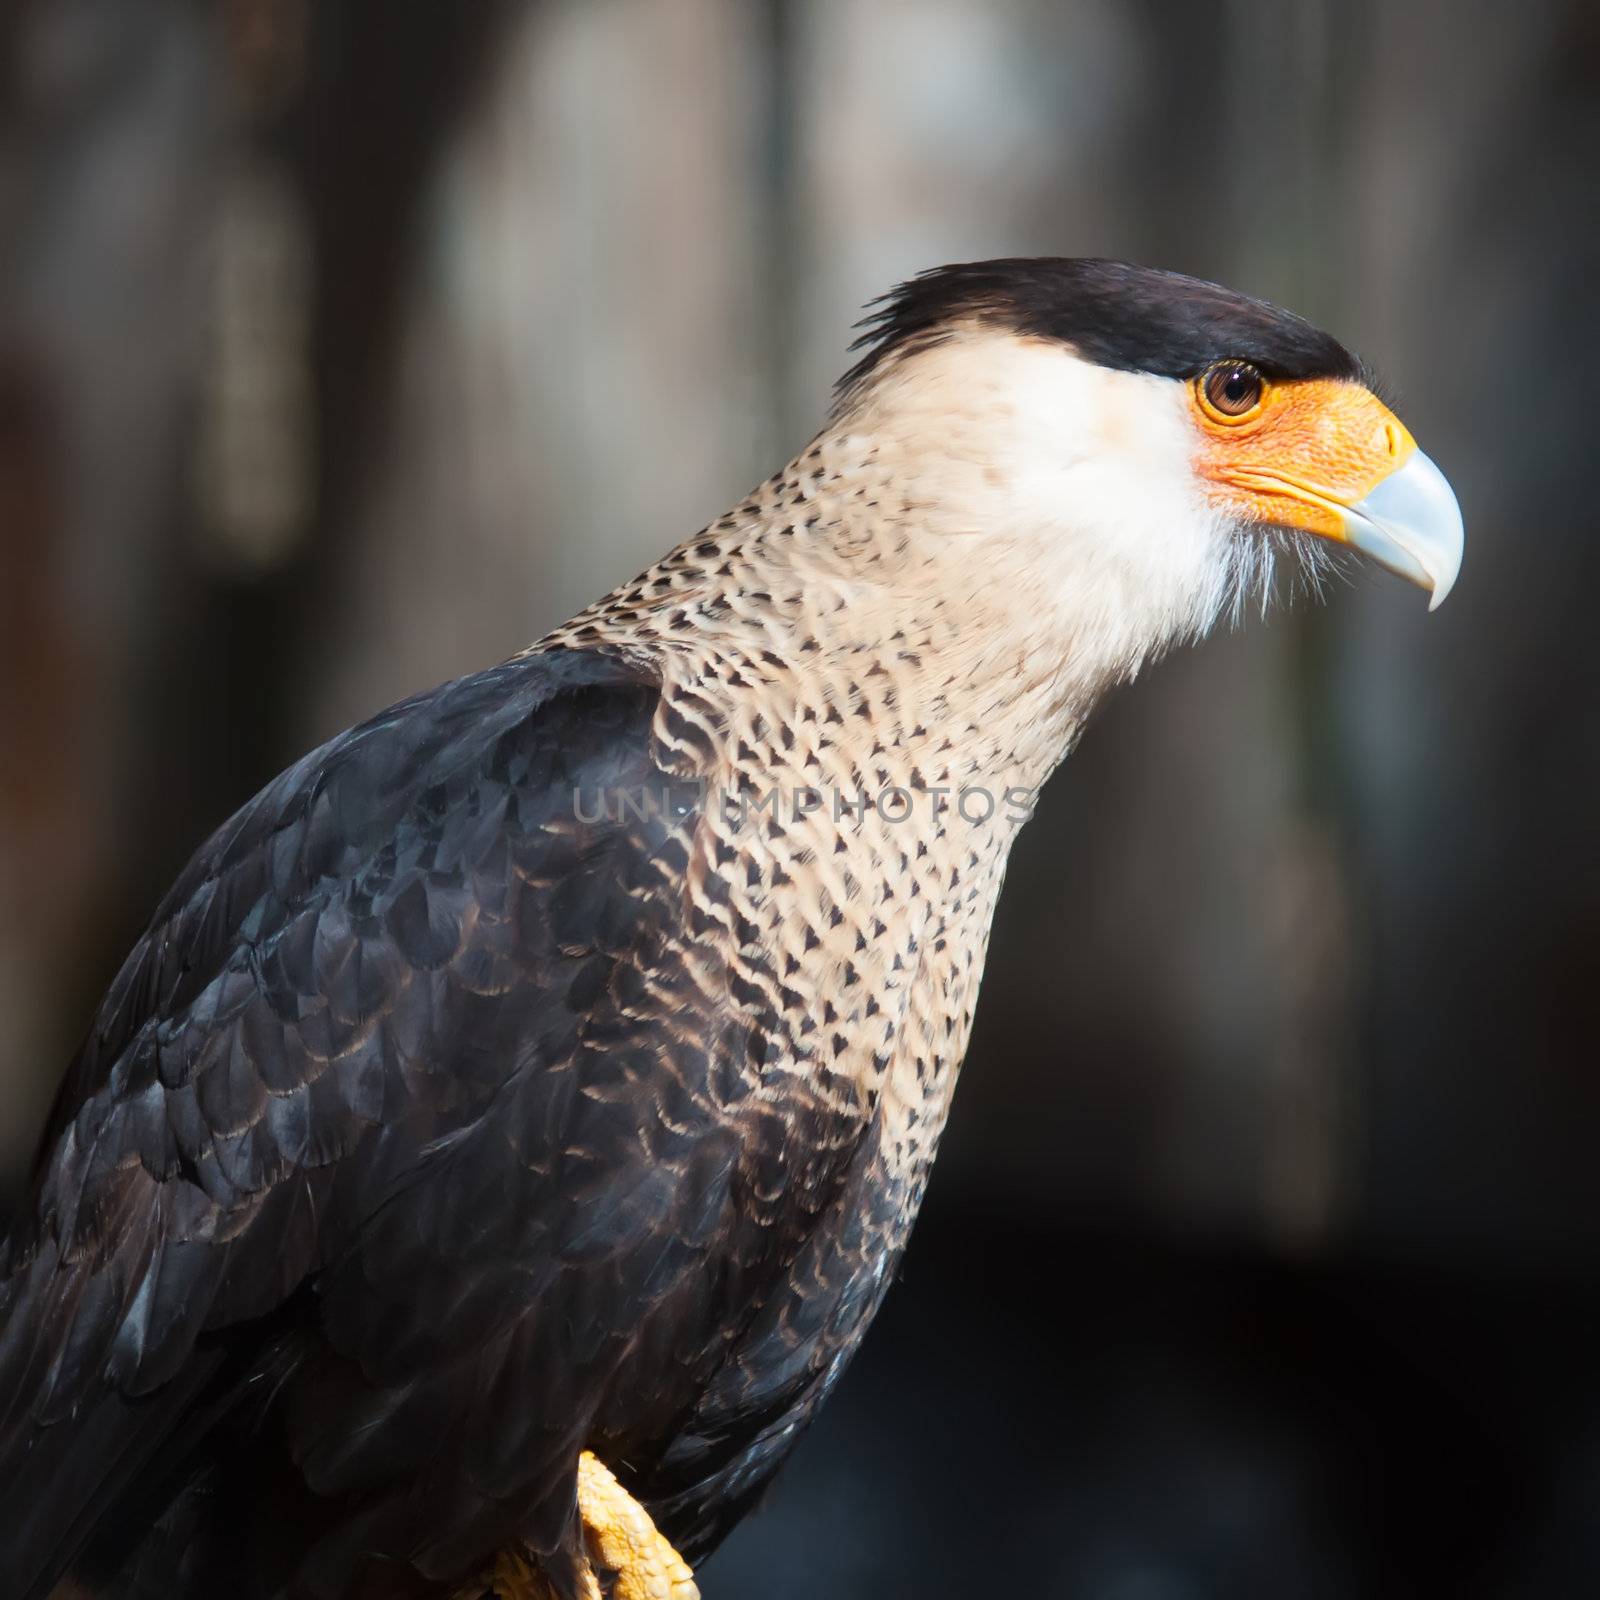 crested caracara by digidreamgrafix